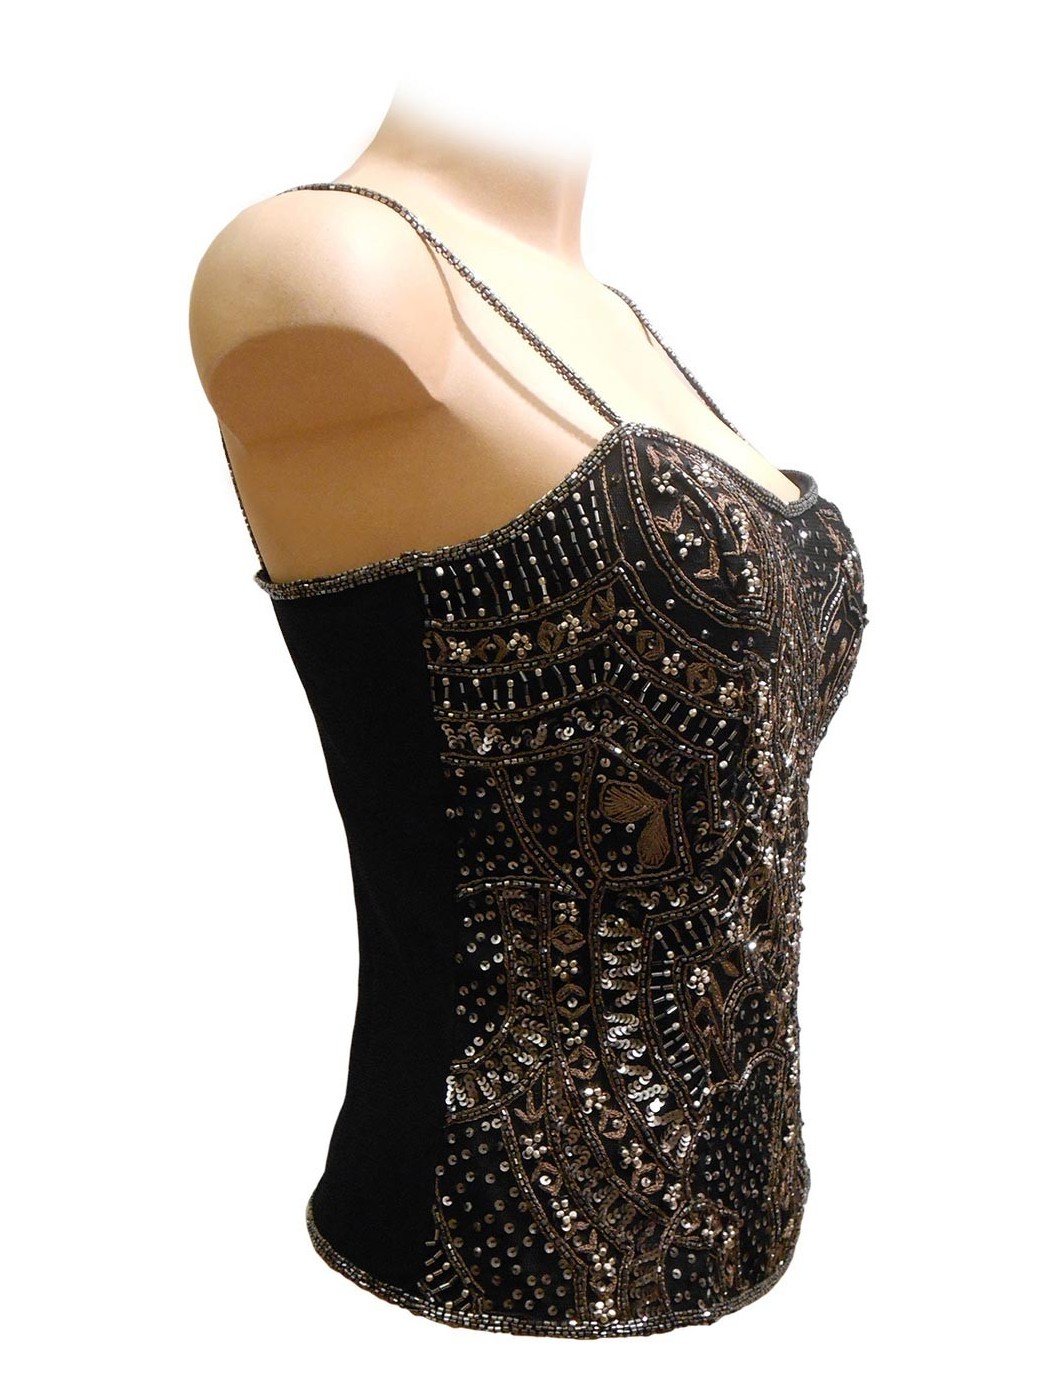 Embroidered top by Luca...